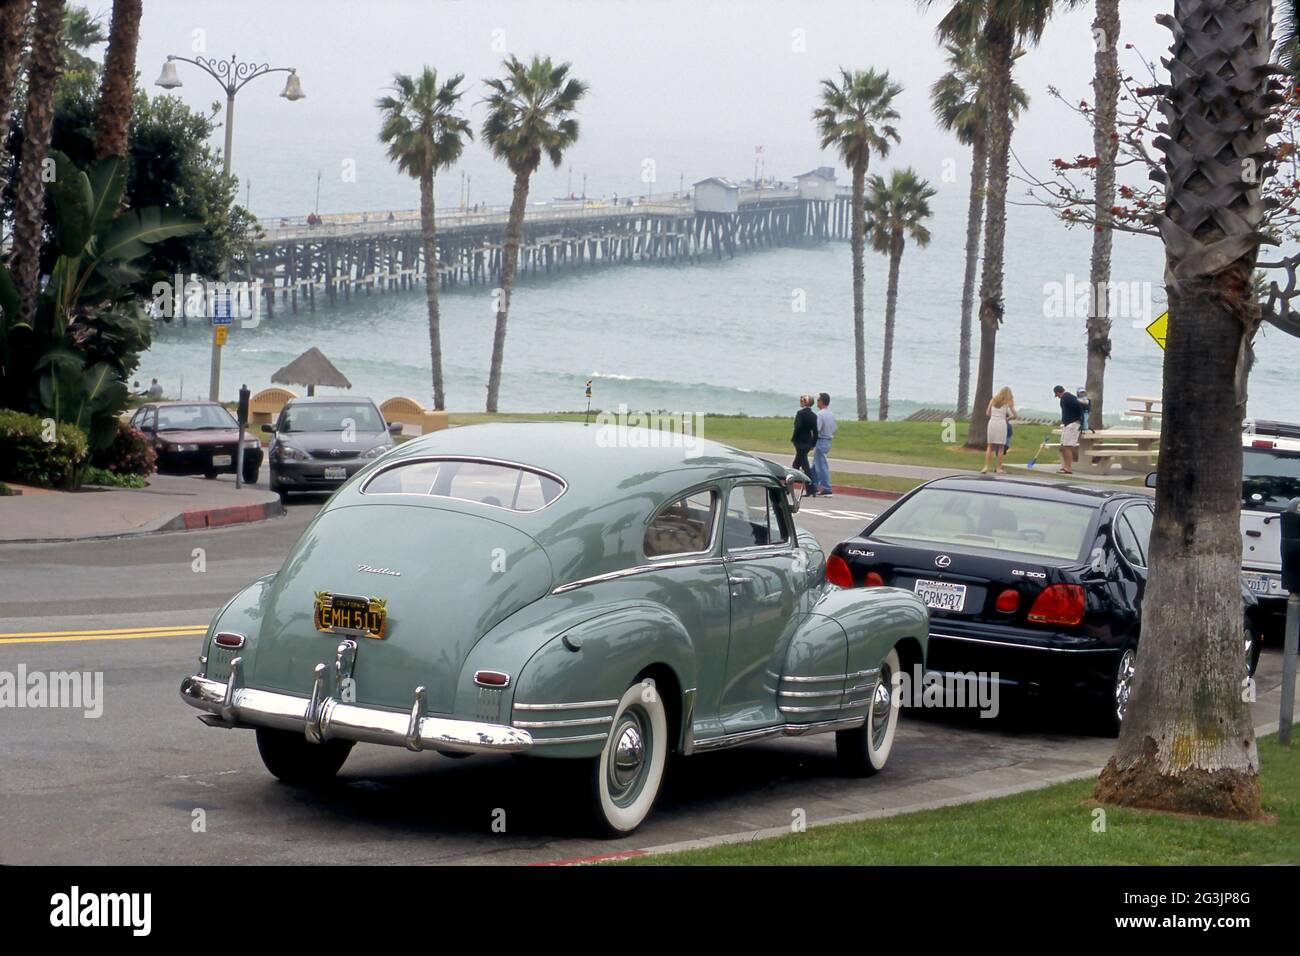 A classic 1940s Chevrolet Fleetline  car parked near the san Clemente Pier in Orange County, CA Stock Photo